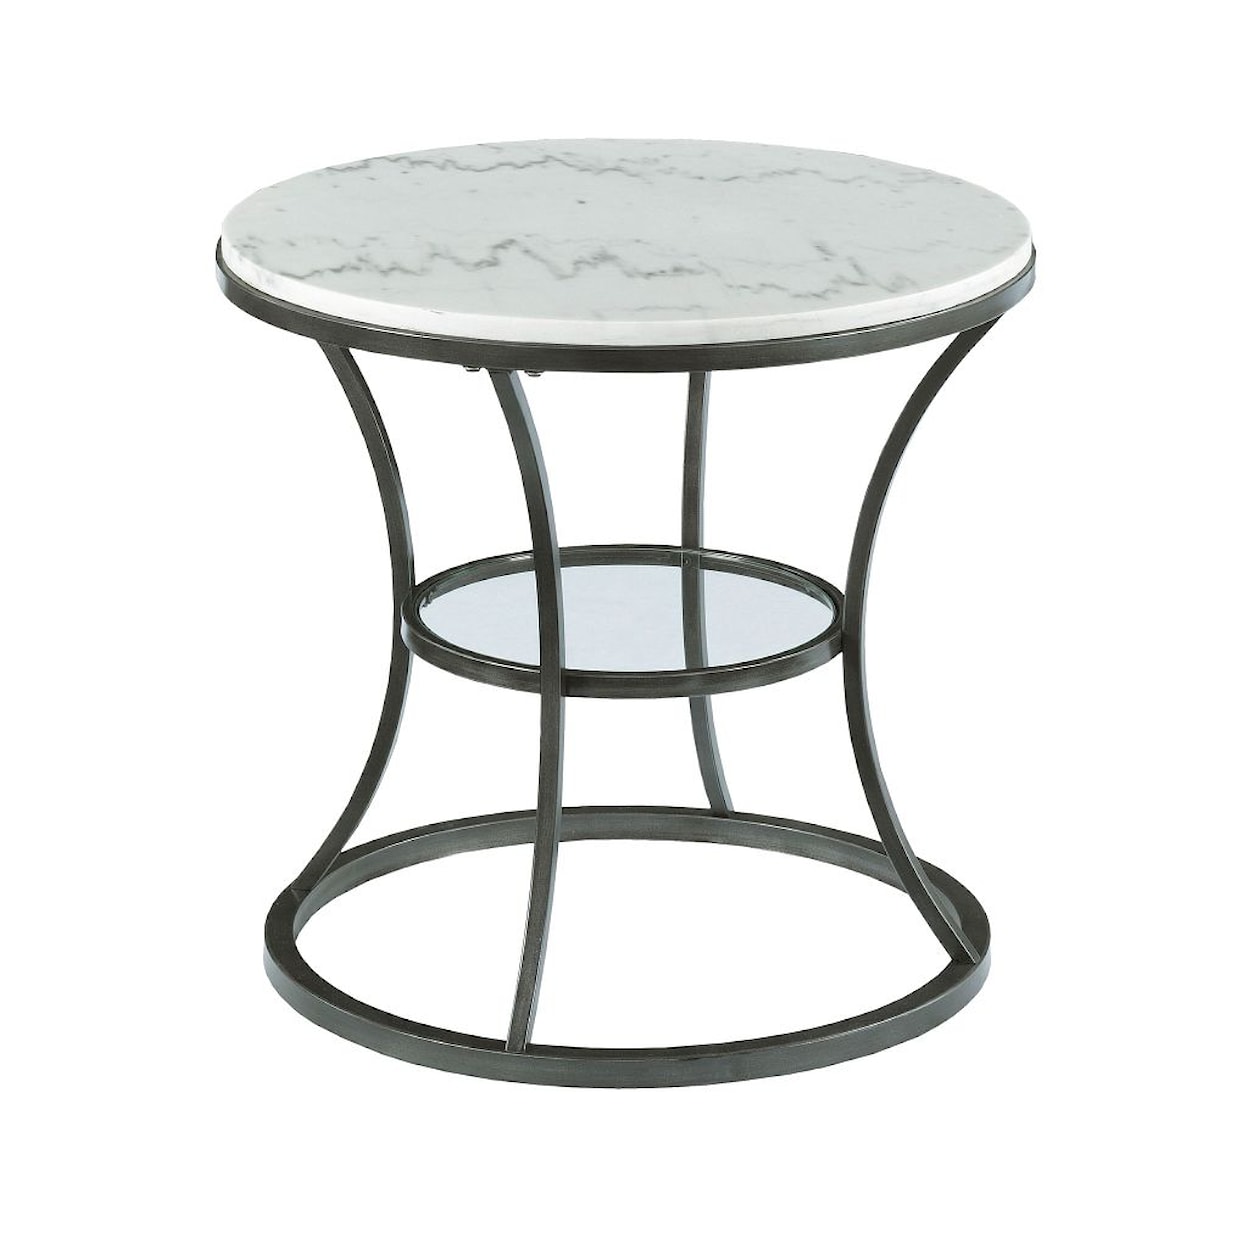 Hammary Isley Isley Marble Top Round End Table